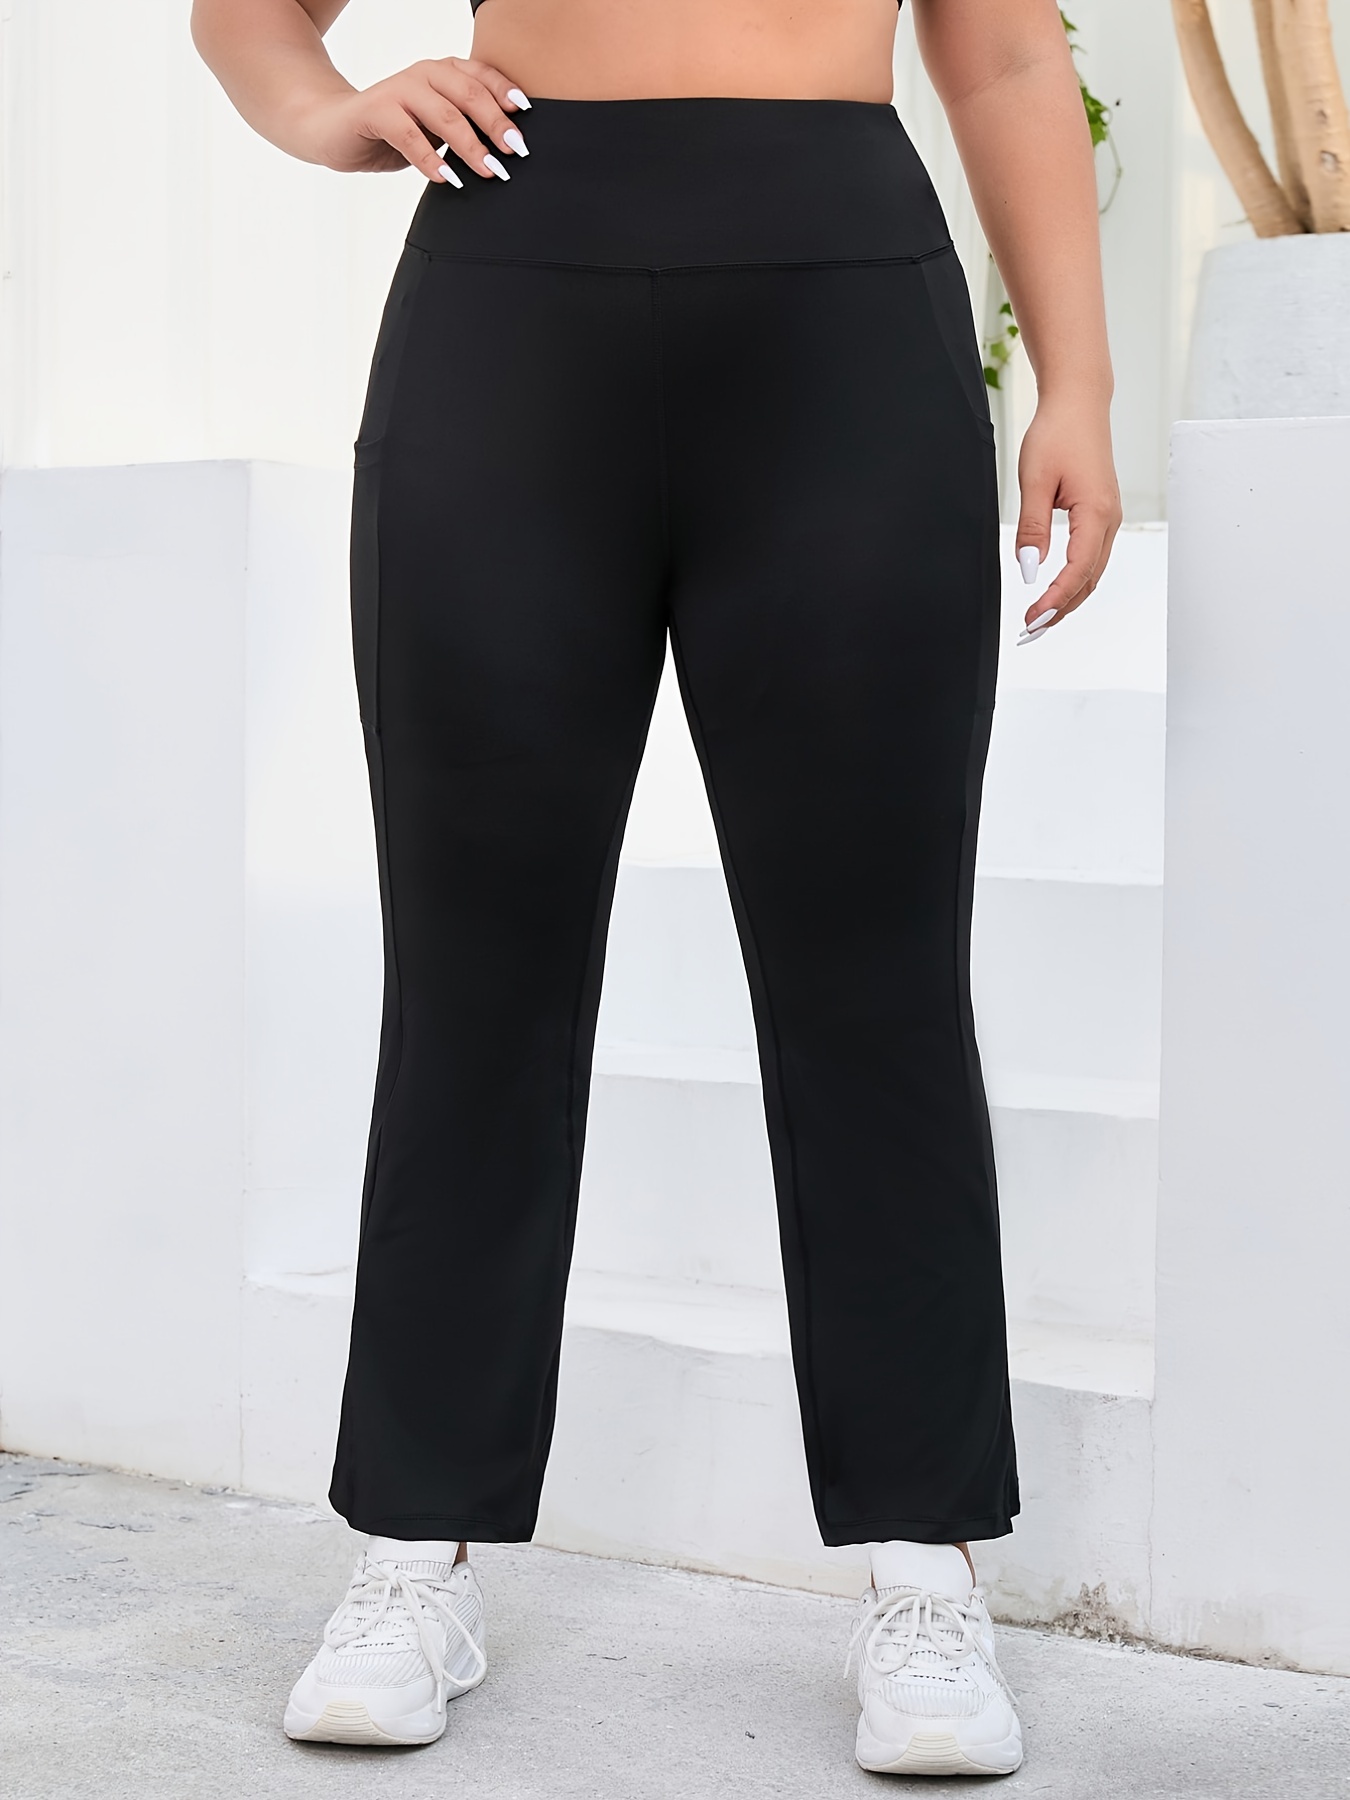 Women Crossover Split Pants Bootcut Yoga Pants High Waisted Full Length  Flare Workout Pants Bootleg Leggings With Pockets - AliExpress